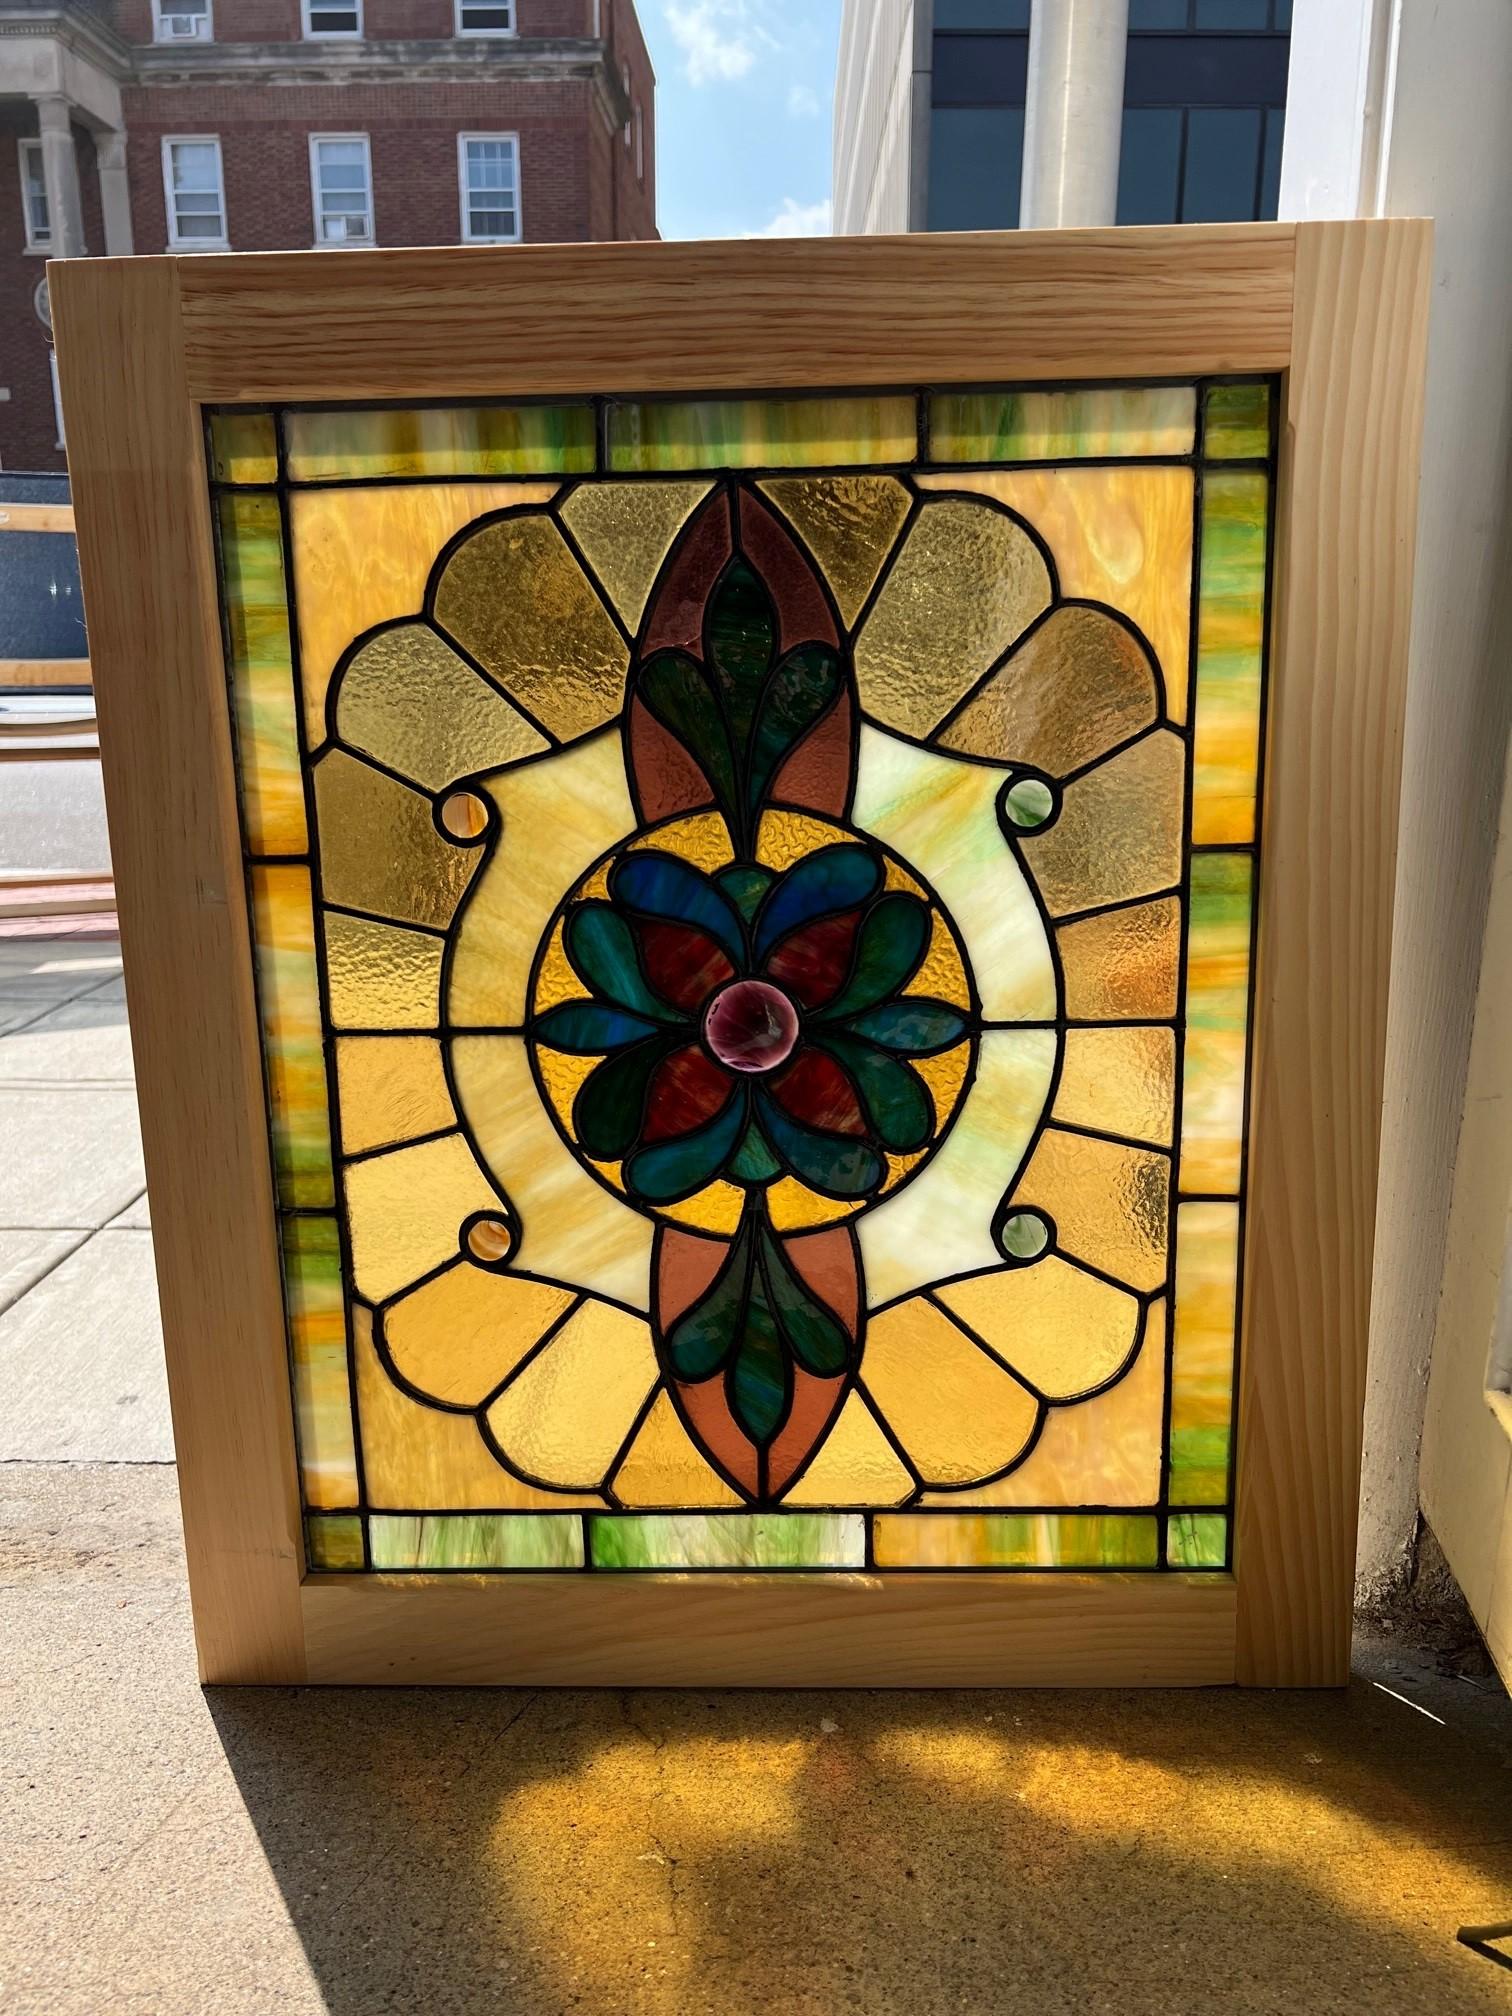 Early 20th Century antique stained glass window in a new wood frame. Salvaged from a building in Pittsburgh Pa, the original frame was rotten and replaced with a new wood frame. It has great colors, nice and bright with a purple swirl center jewel.